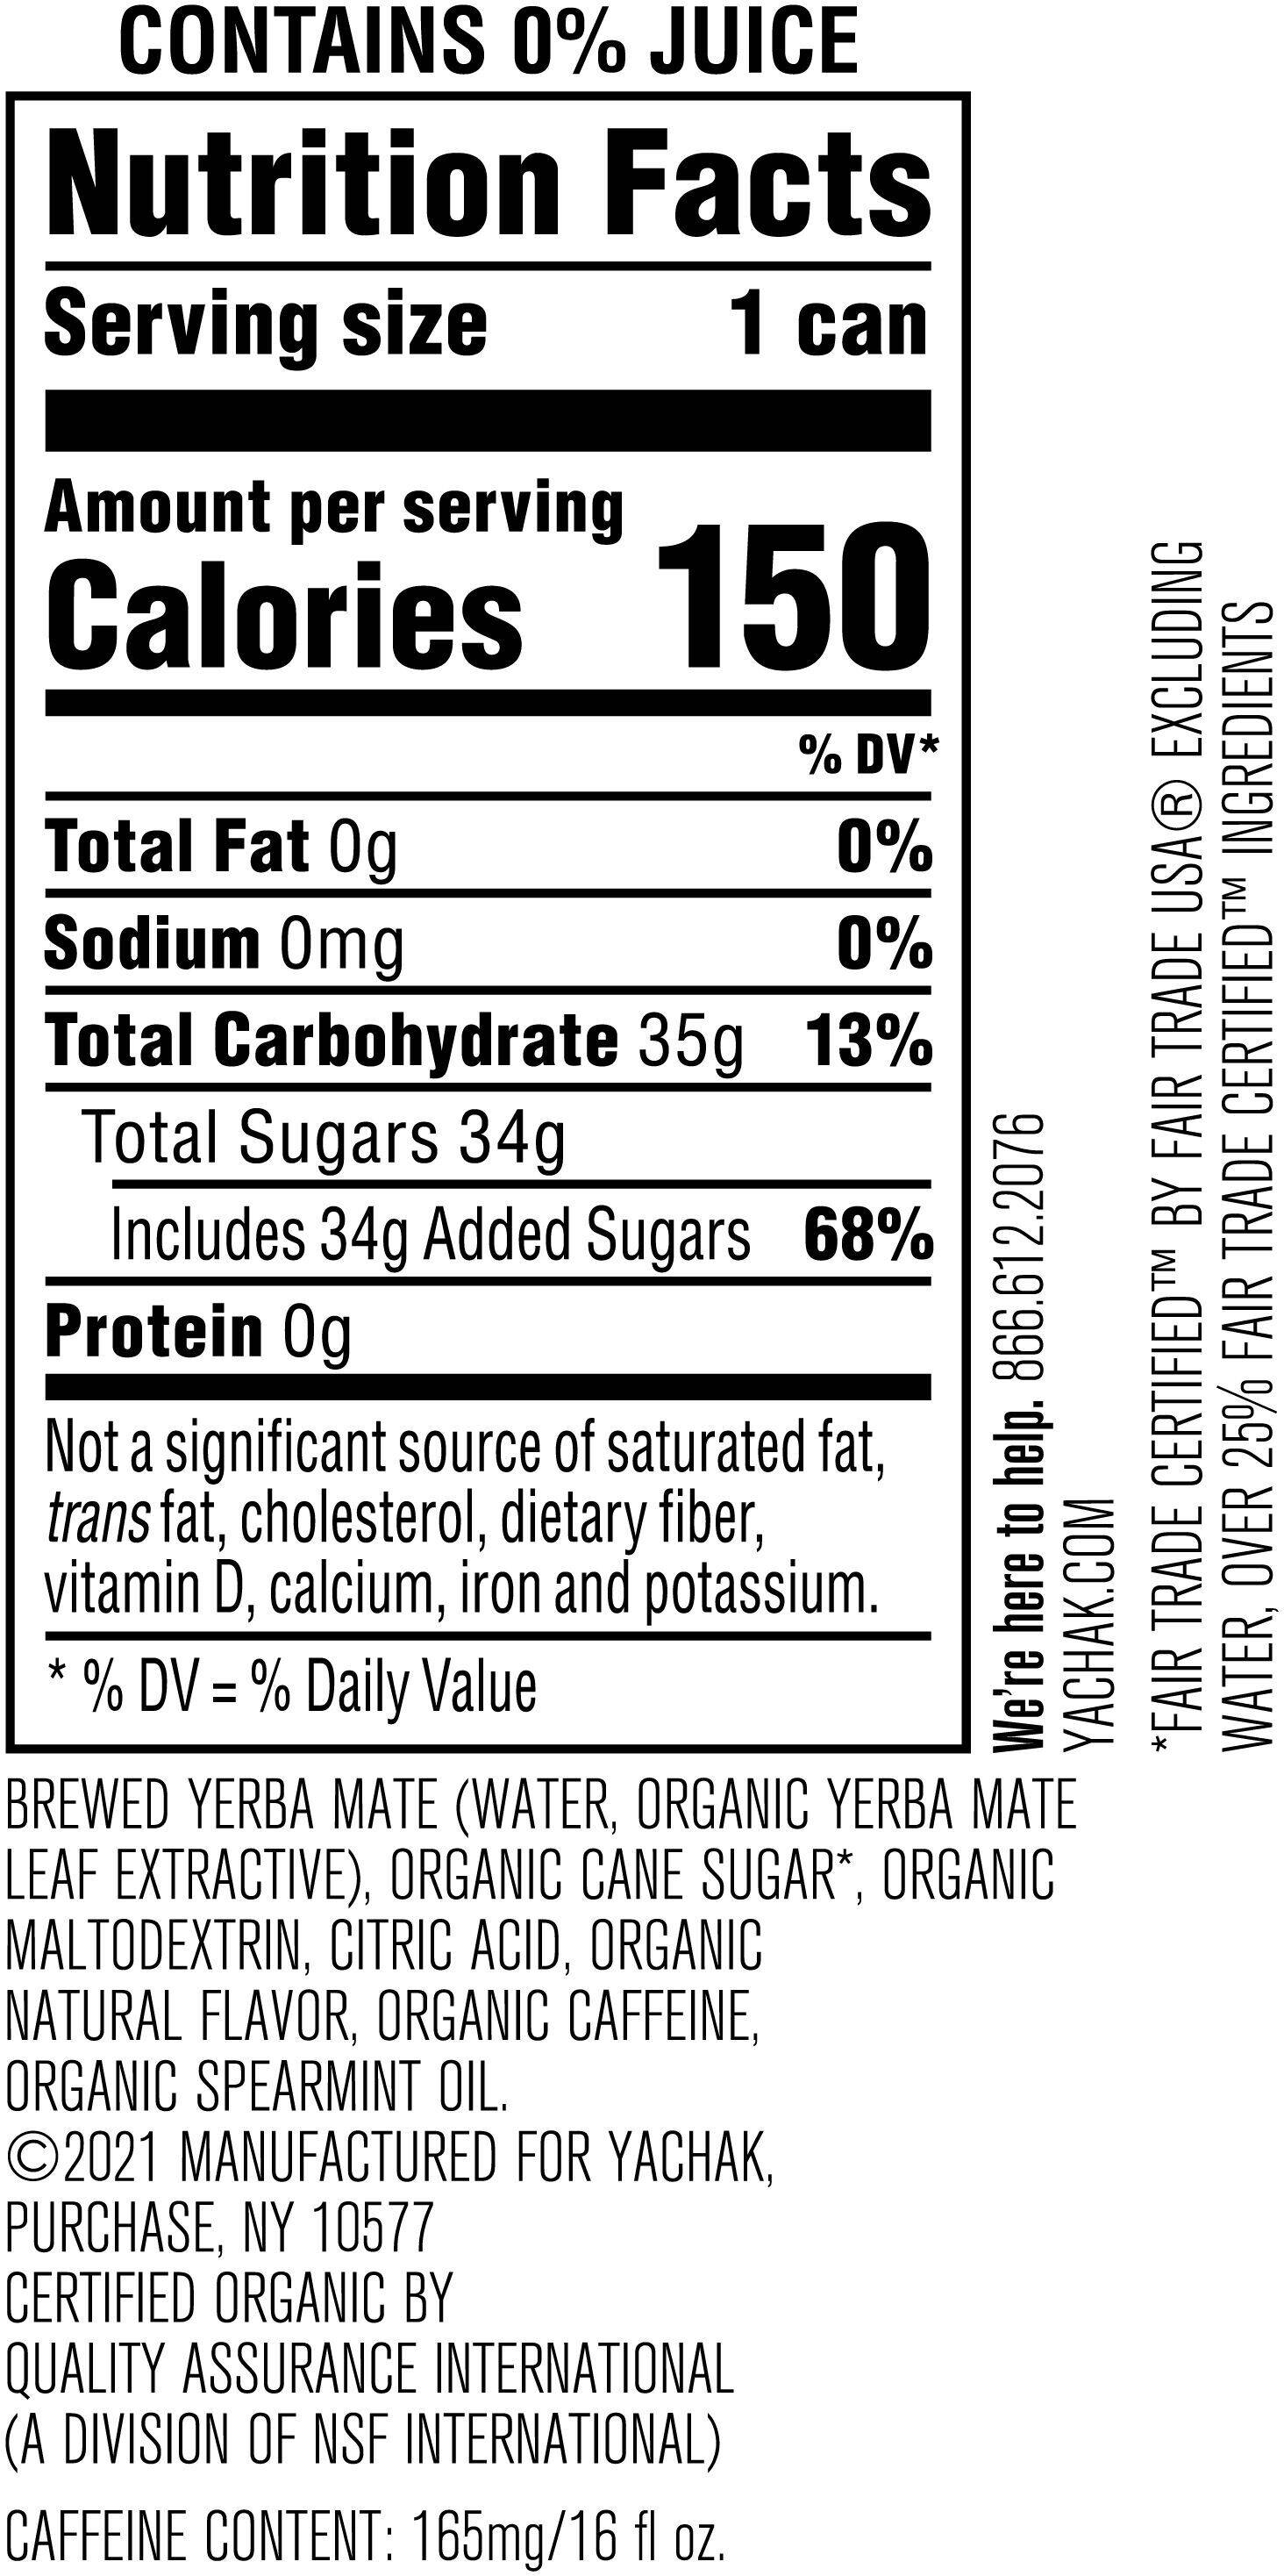 Image describing nutrition information for product Yachak Organic Yerba Mate Ultimate Mint